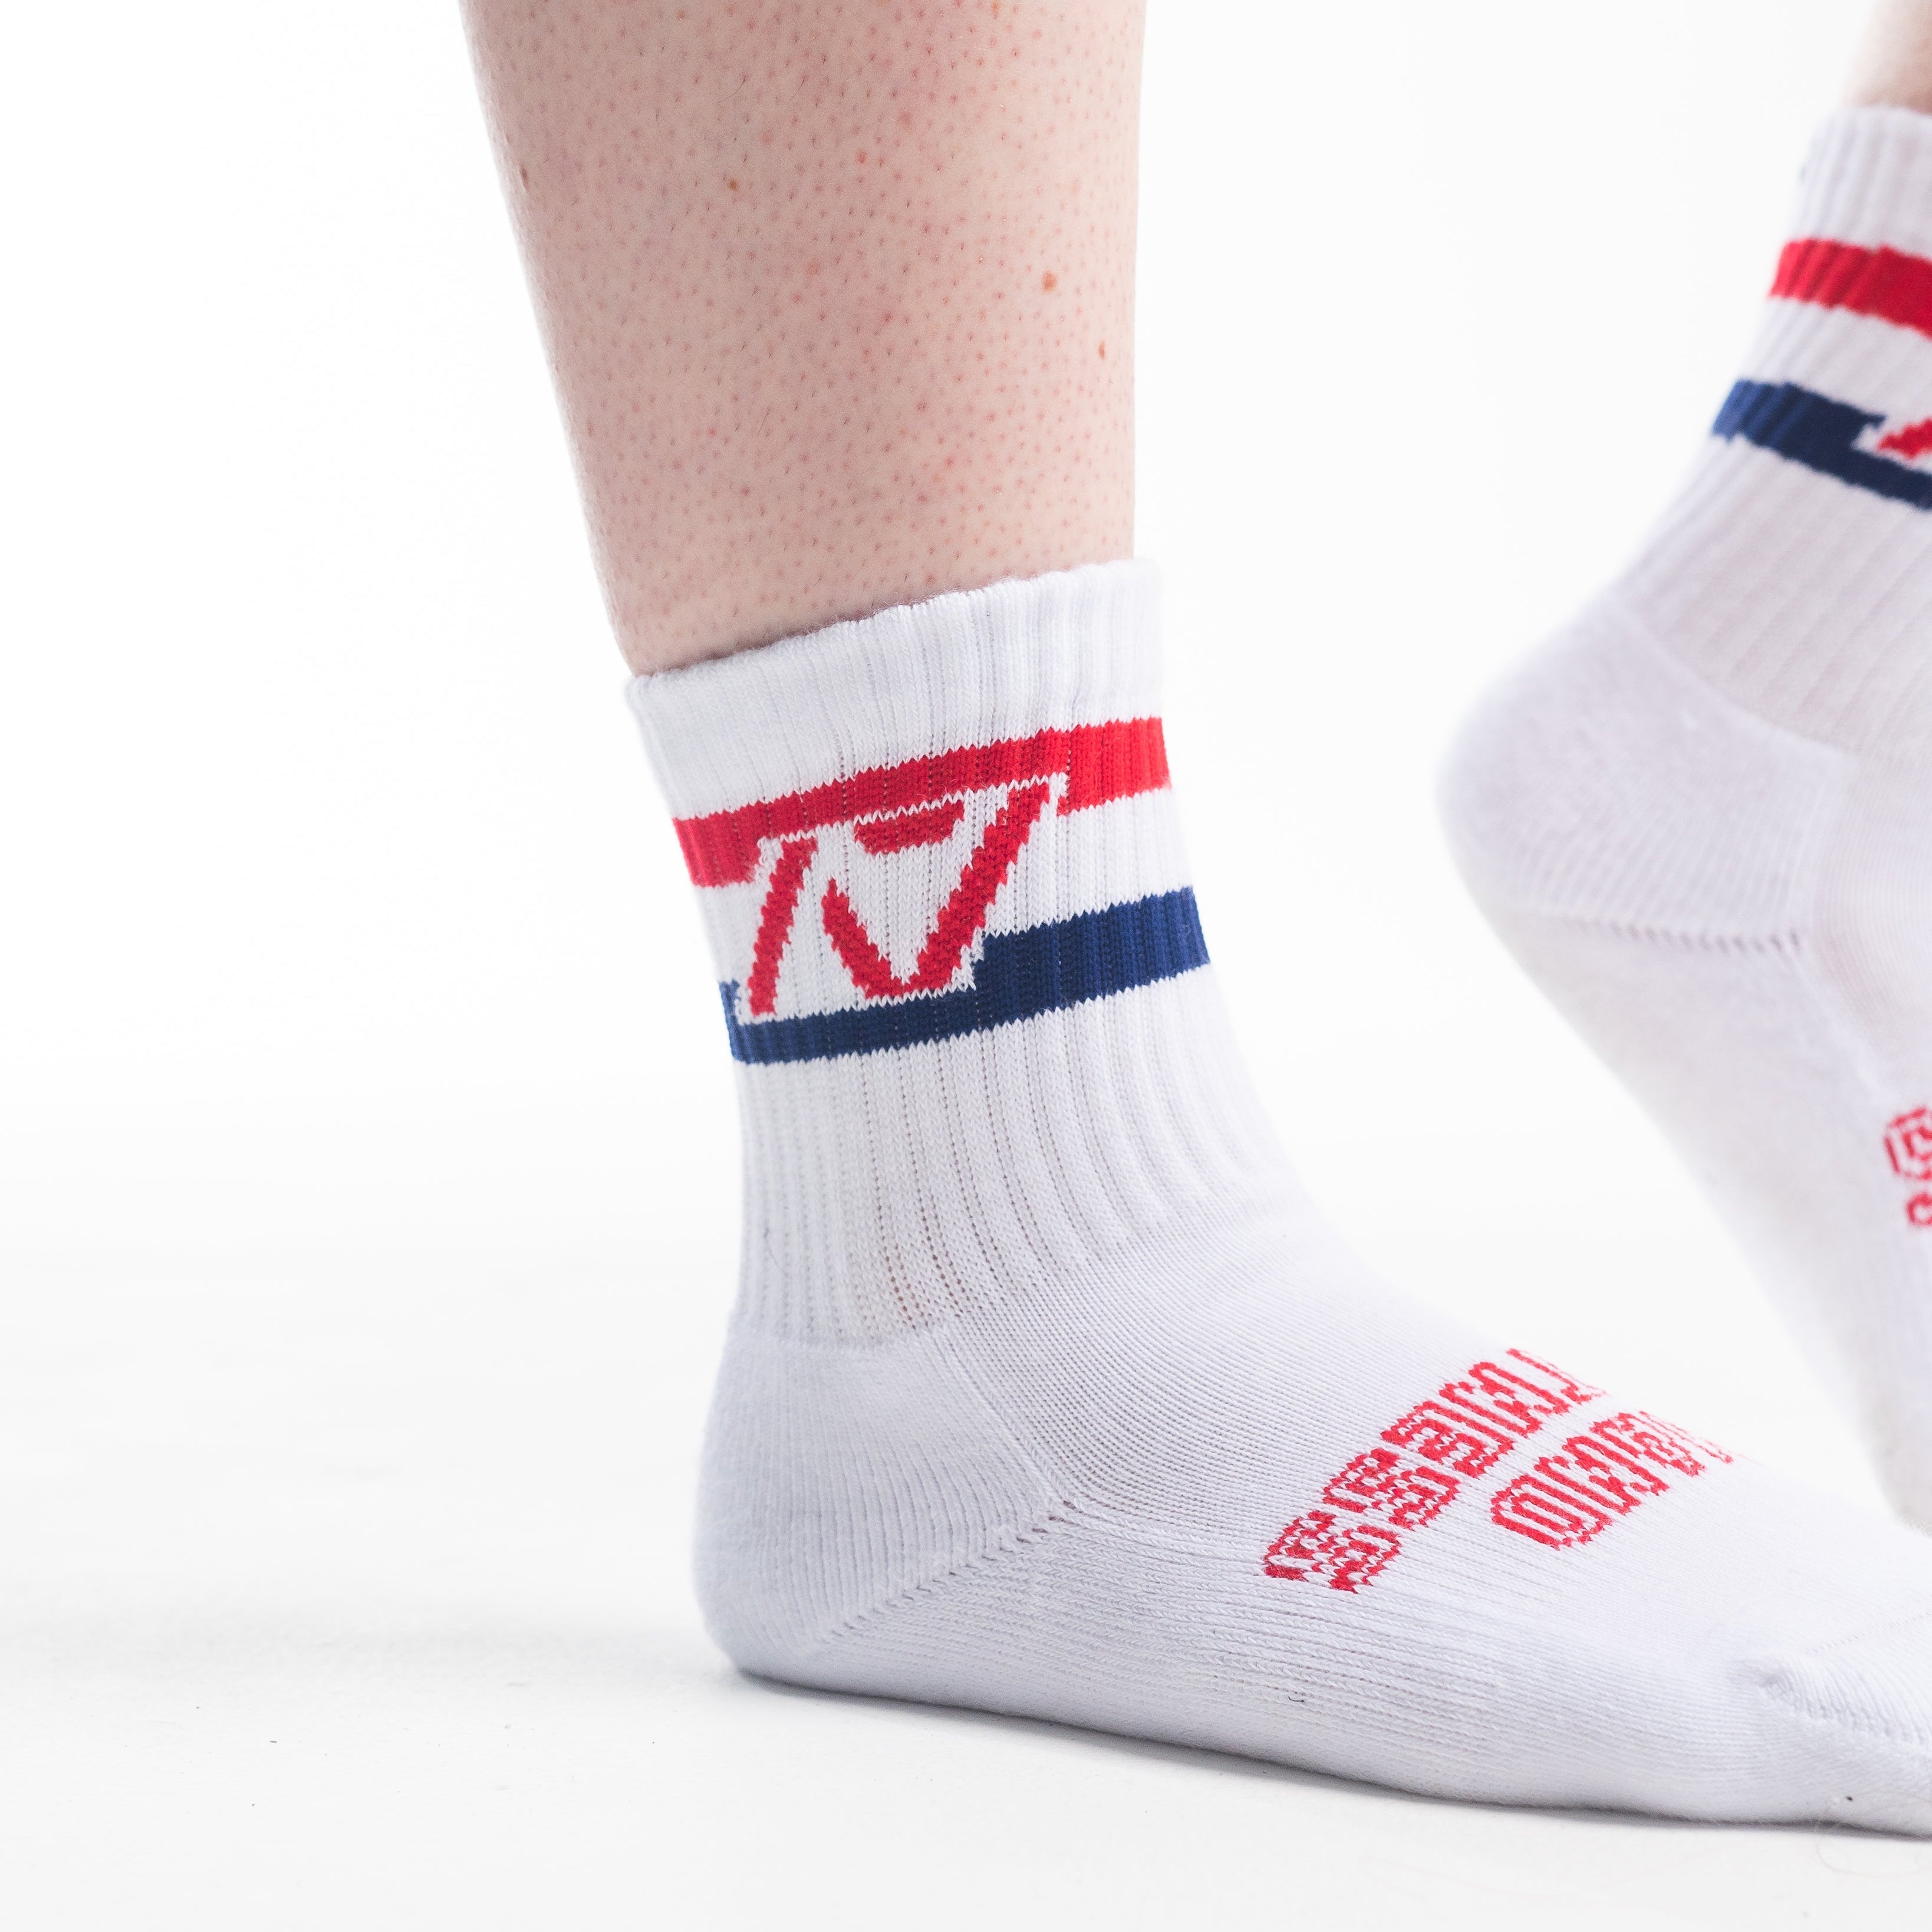 A7 RWB Crew socks showcase red, white and blue logos to let your energy show on the platform, in your training or while out and about. The IPF Approved Shadow Stone Meet Kit includes Powerlifting Singlet, A7 Meet Shirt, A7 Zebra Wrist Wraps, A7 Deadlift Socks, Hourglass Knee Sleeves (Stiff Knee Sleeves and Rigor Mortis Knee Sleeves). Genouillères powerlifting shipping to France, Spain, Ireland, Germany, Italy, Sweden and EU.